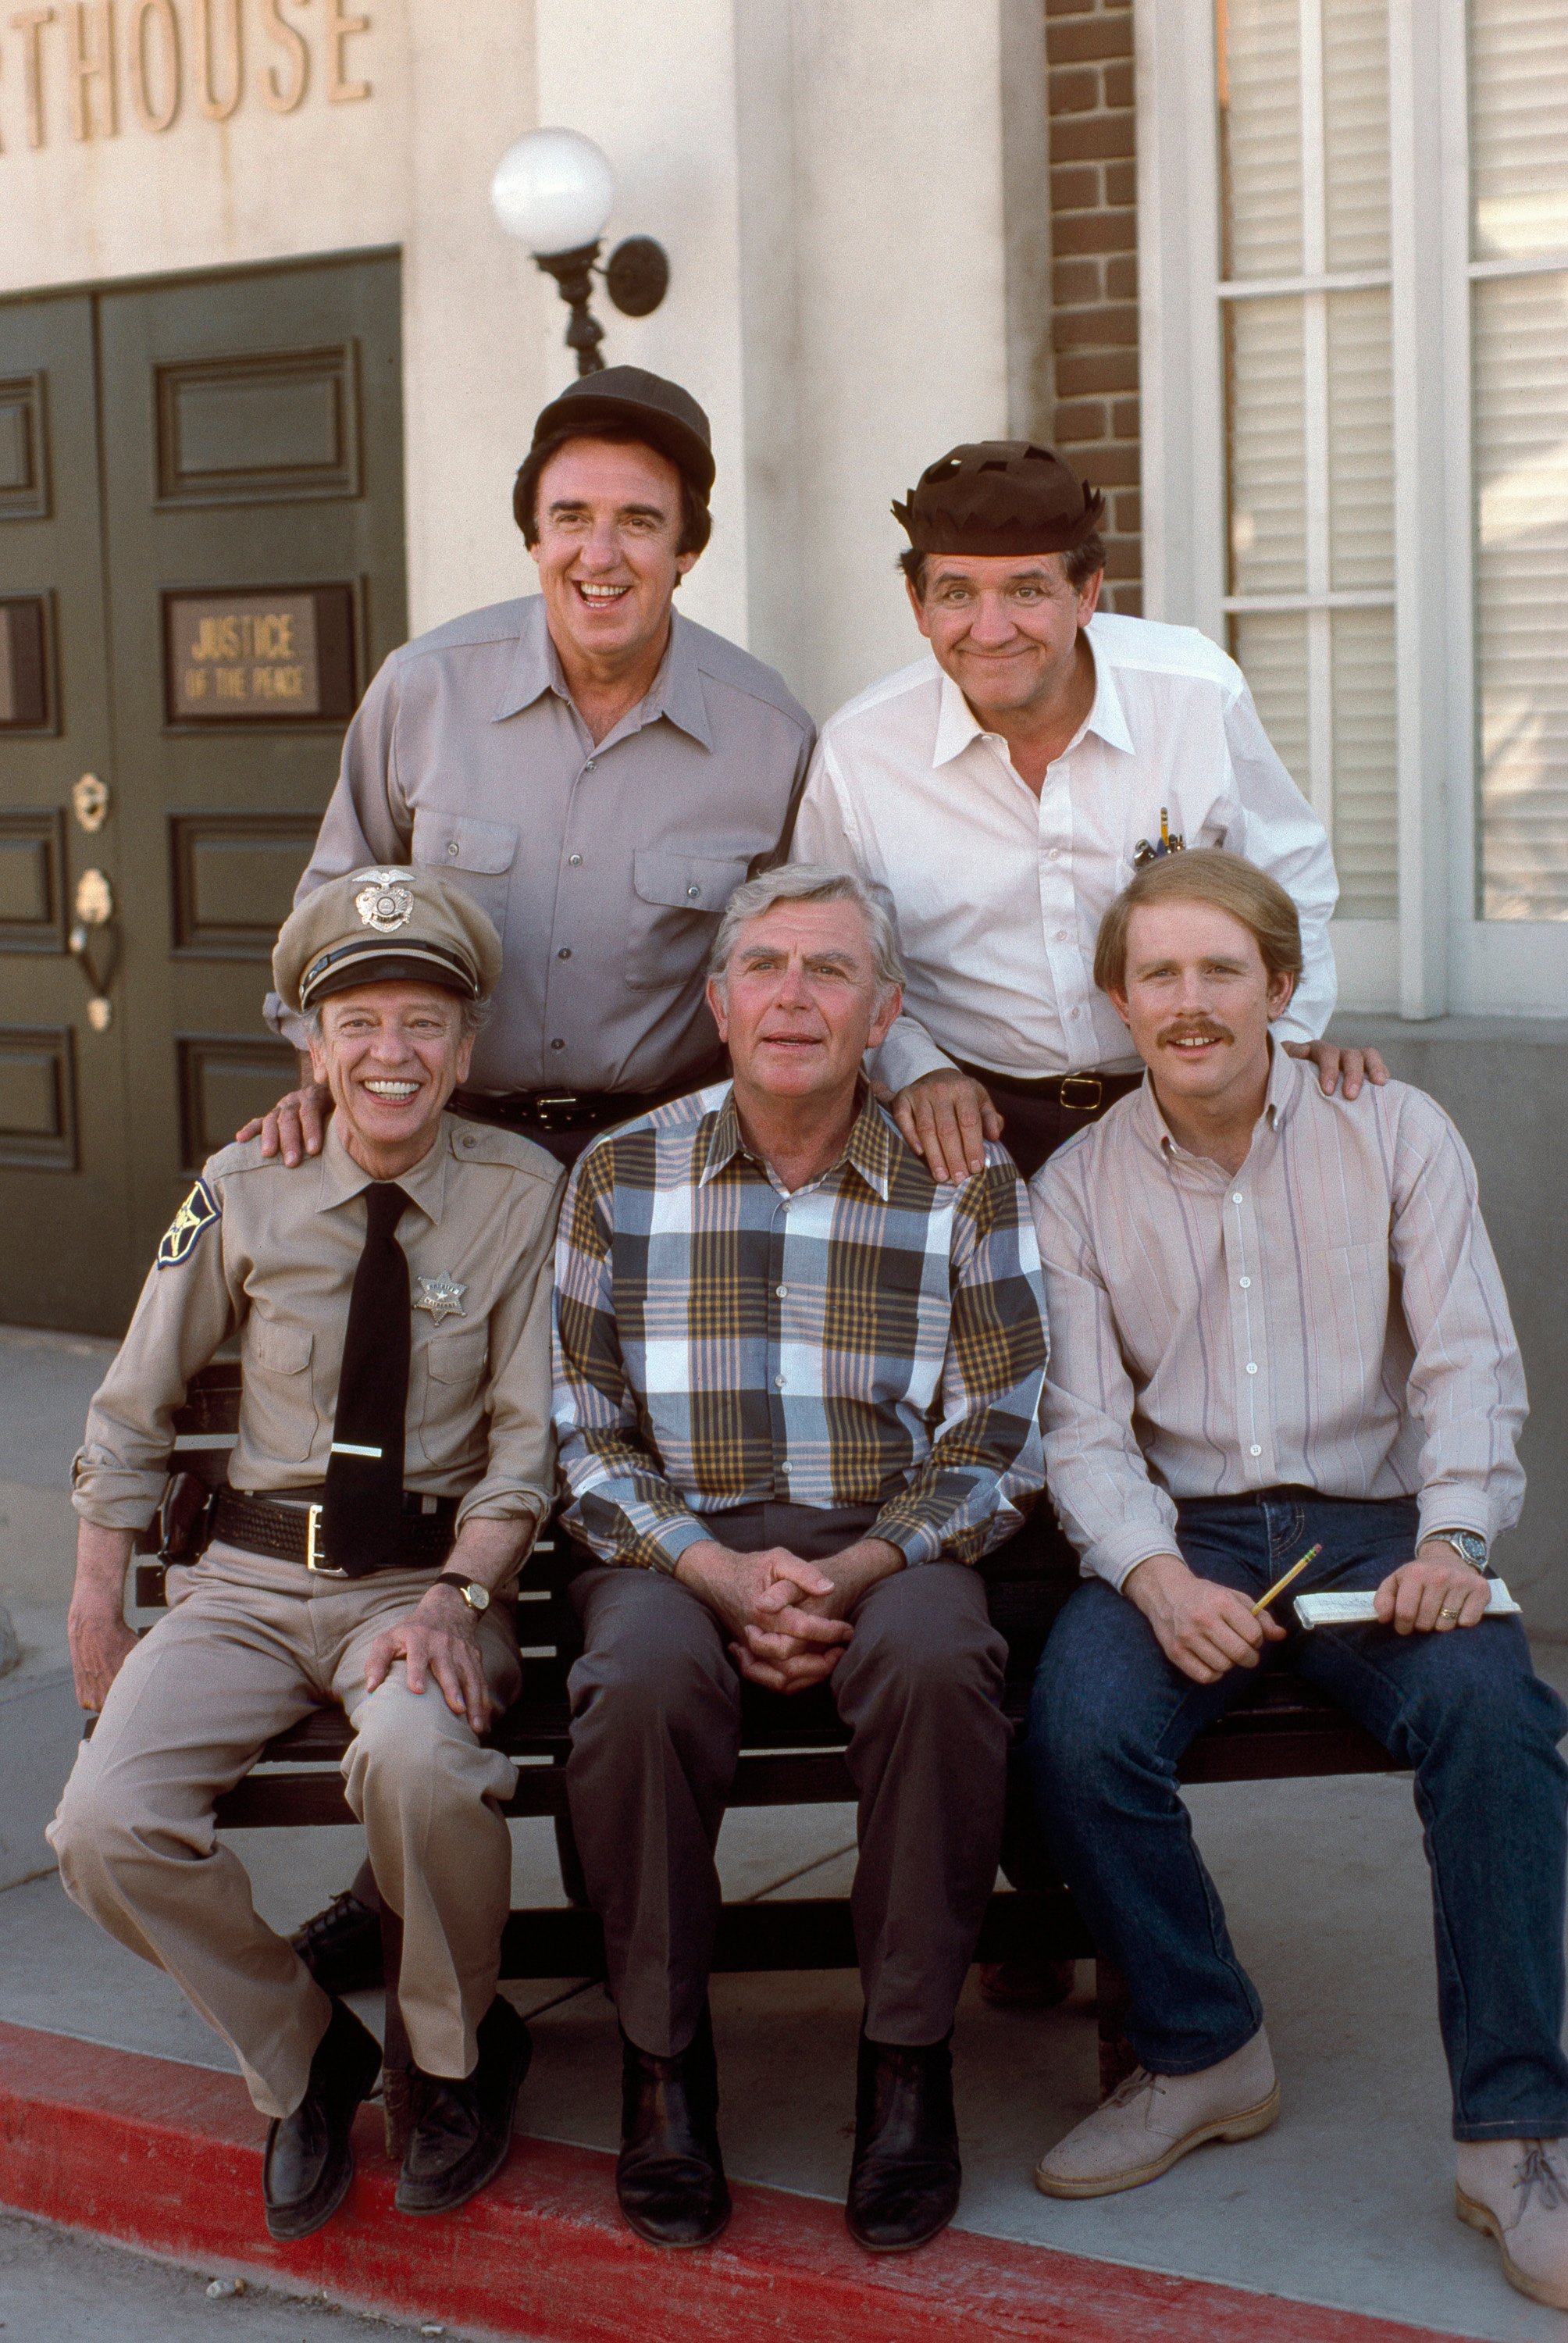 A few cast members from the 1986 television movie 'Return to Mayberry' pose for a photo: (back row l-r) Jim Nabors as Gomer Pyle, George Lindsey as Goober Pyle (front row l-r) Don Knotts as Barney Fife, Andy Griffith as Andy Taylor, Ron Howard as Opie Taylor